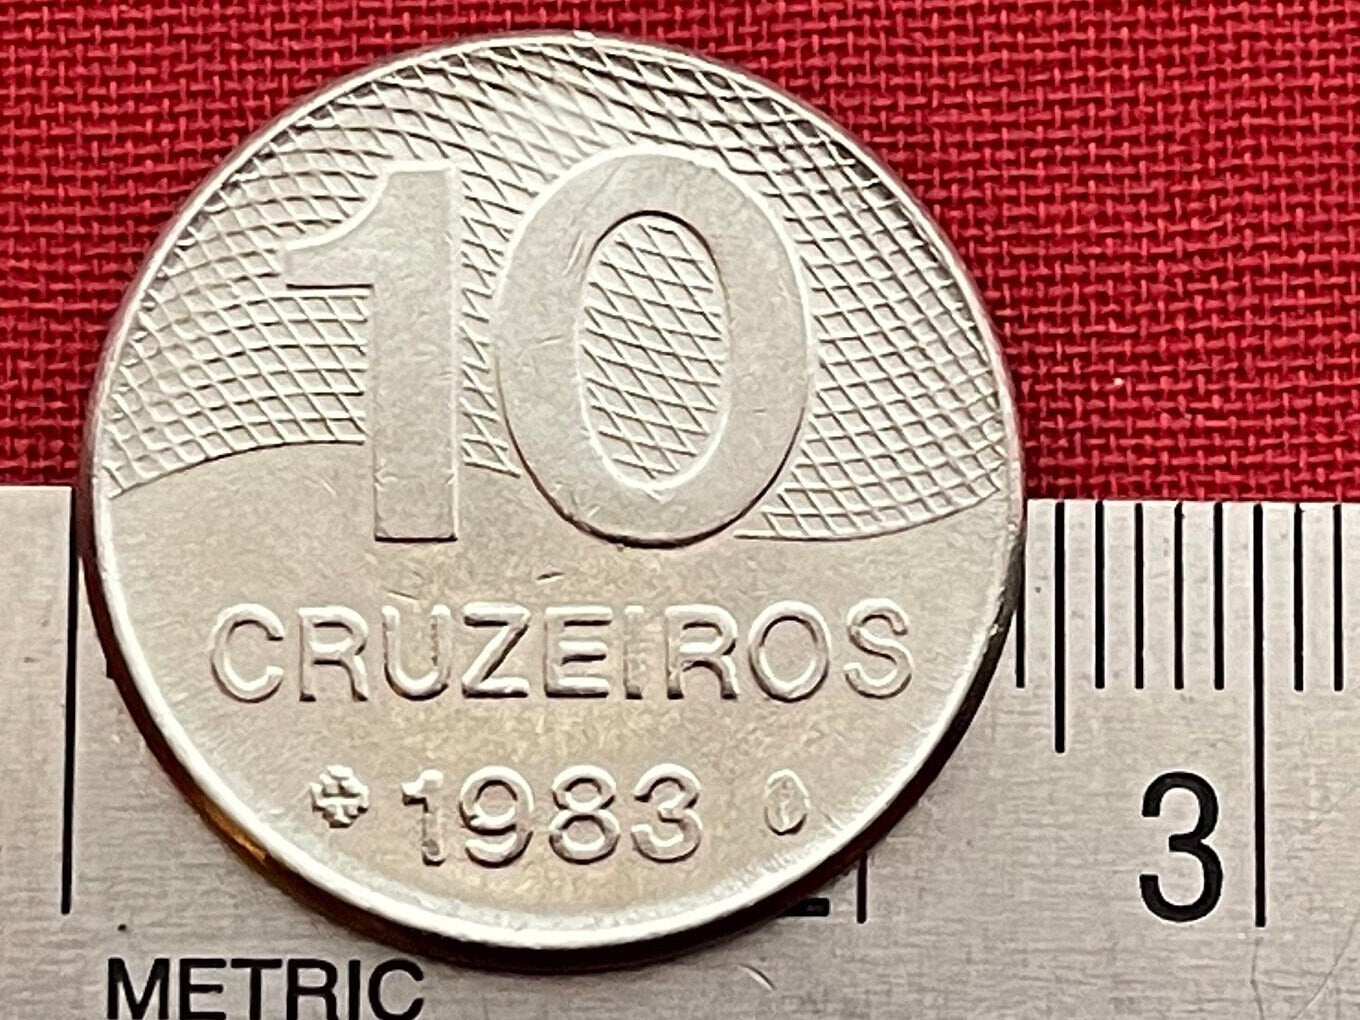 Brazil Highway Map 10 Cruzieros Brazil Authentic Coin Money for Jewelry and Craft Making (Long Distance Driving)